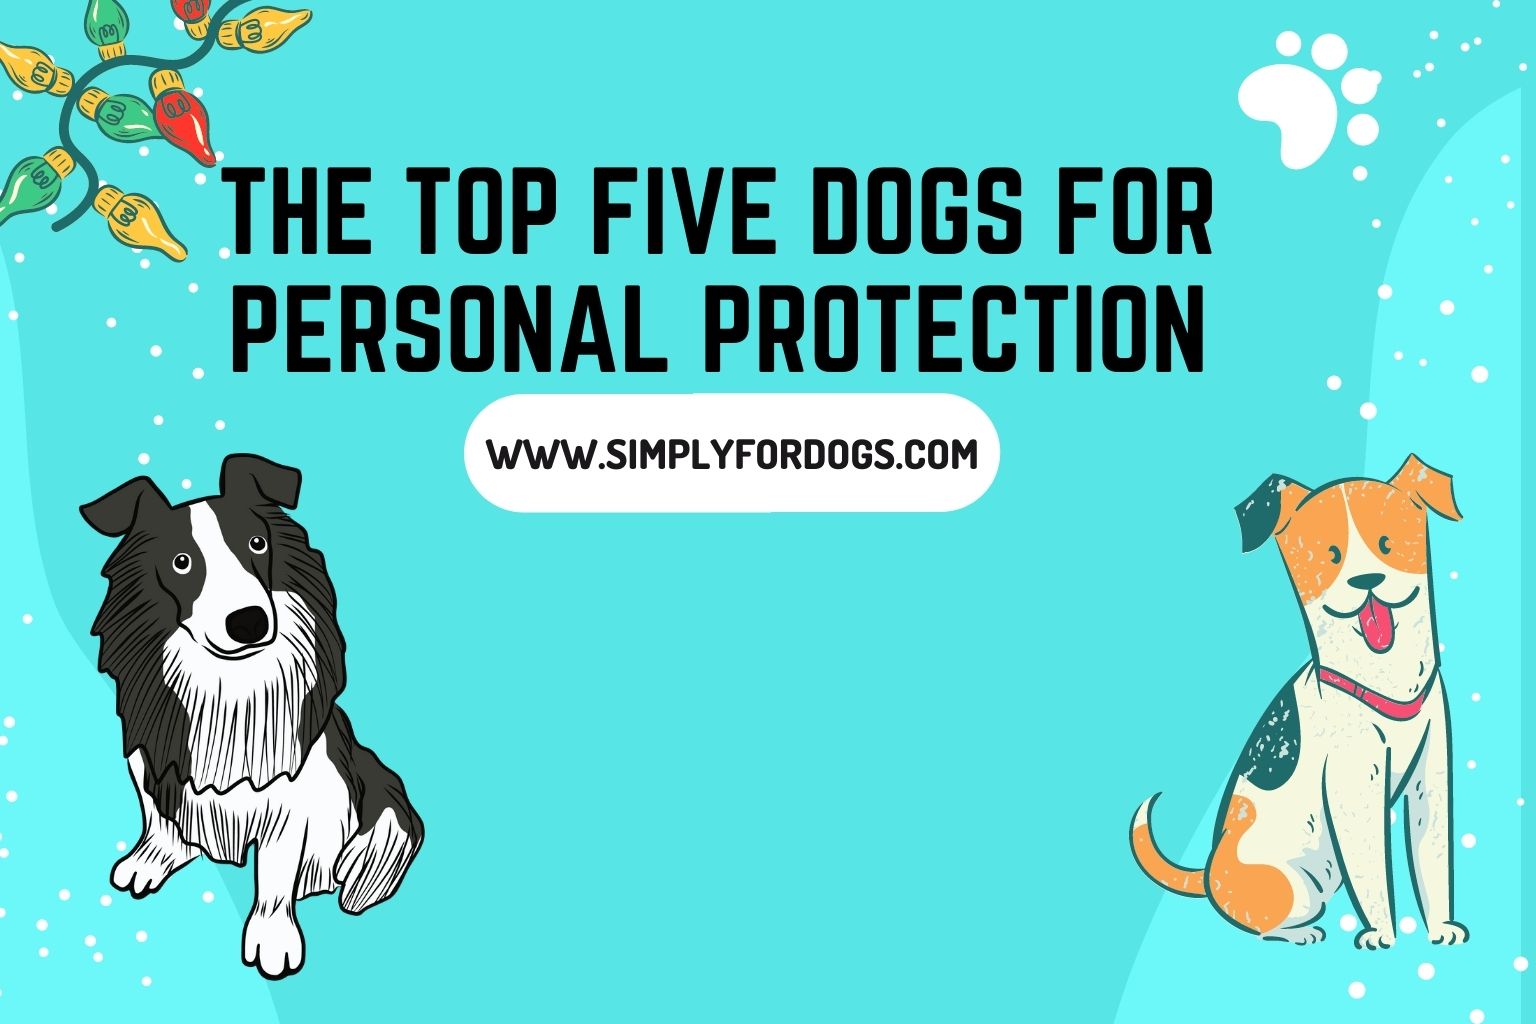 The Top Five Dogs for Personal Protection